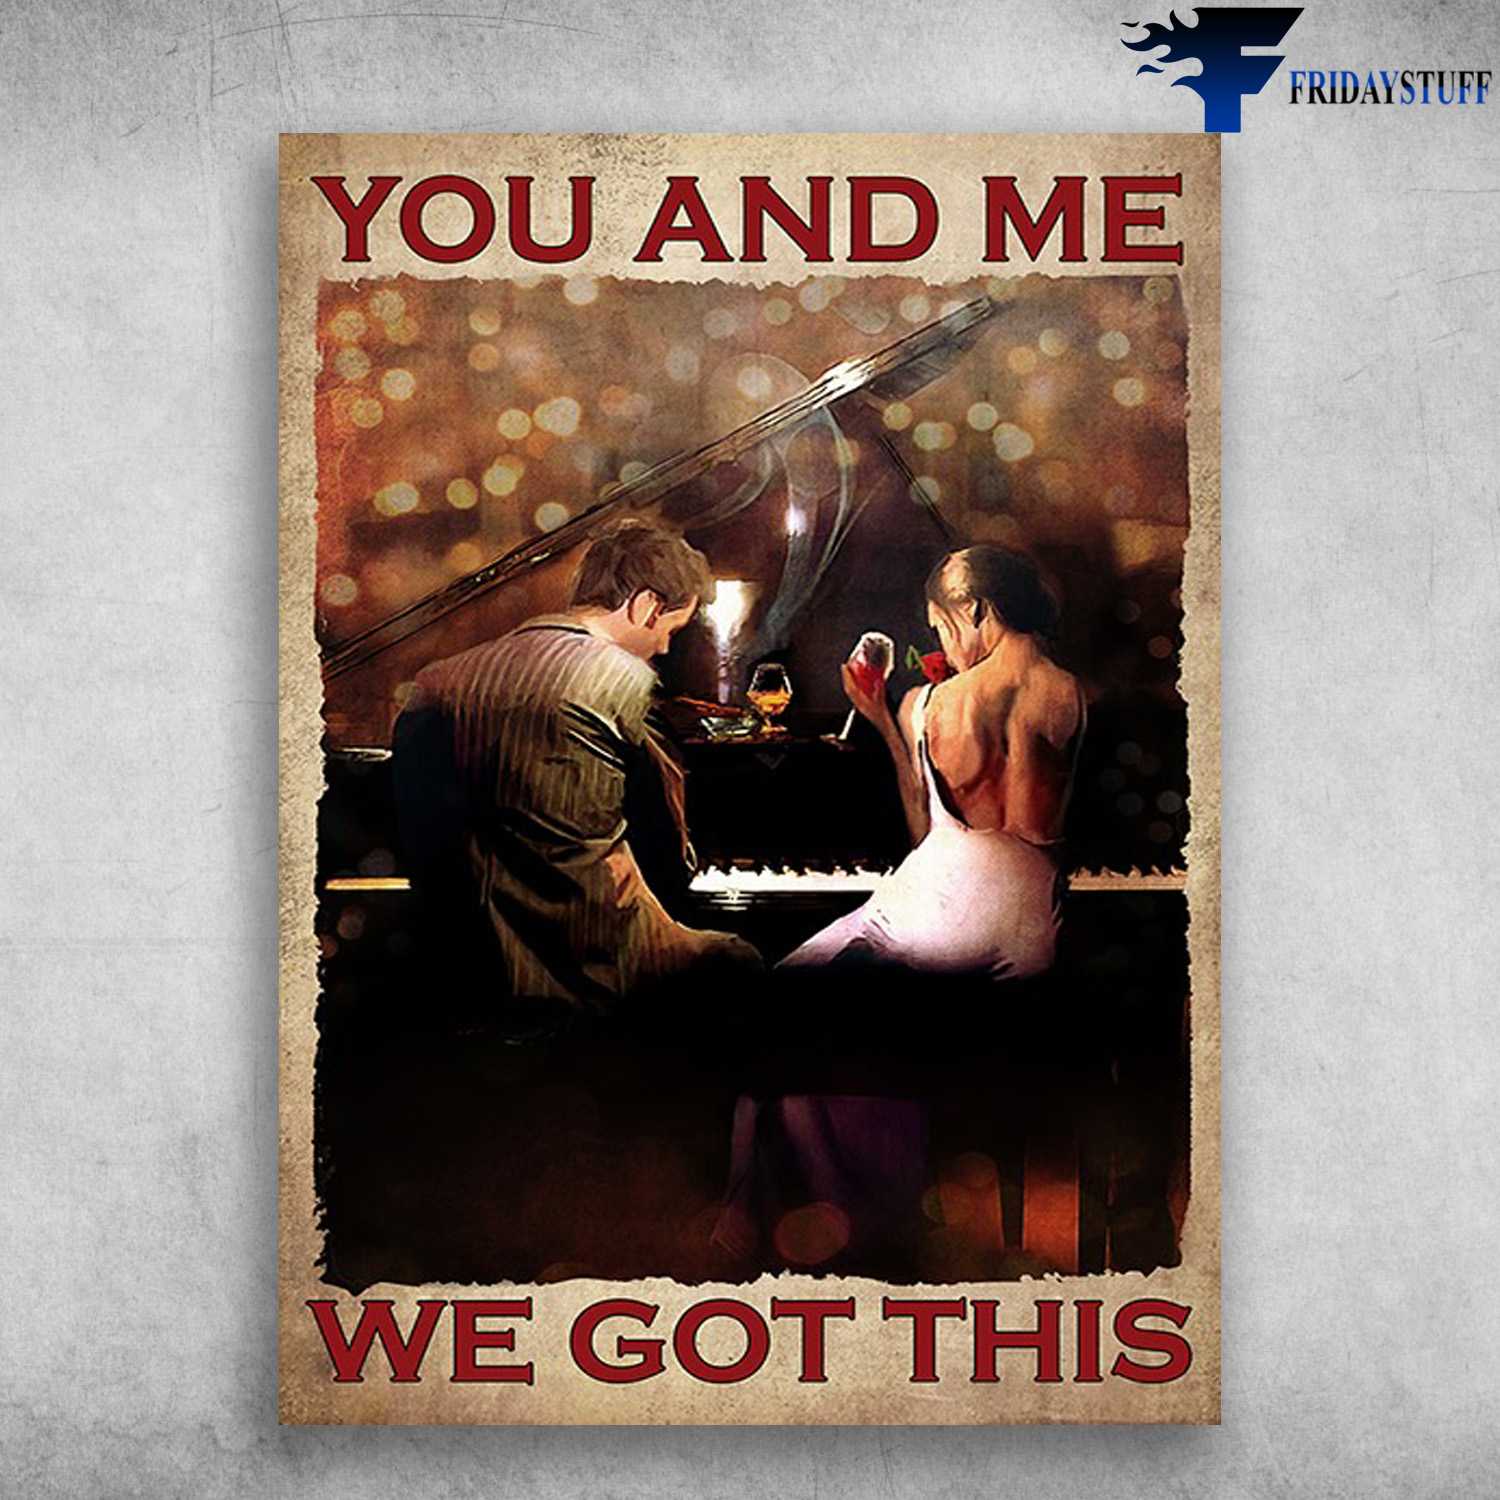 Love Couple, Piano And Wine - You And Me, We Got This, Music And Drink